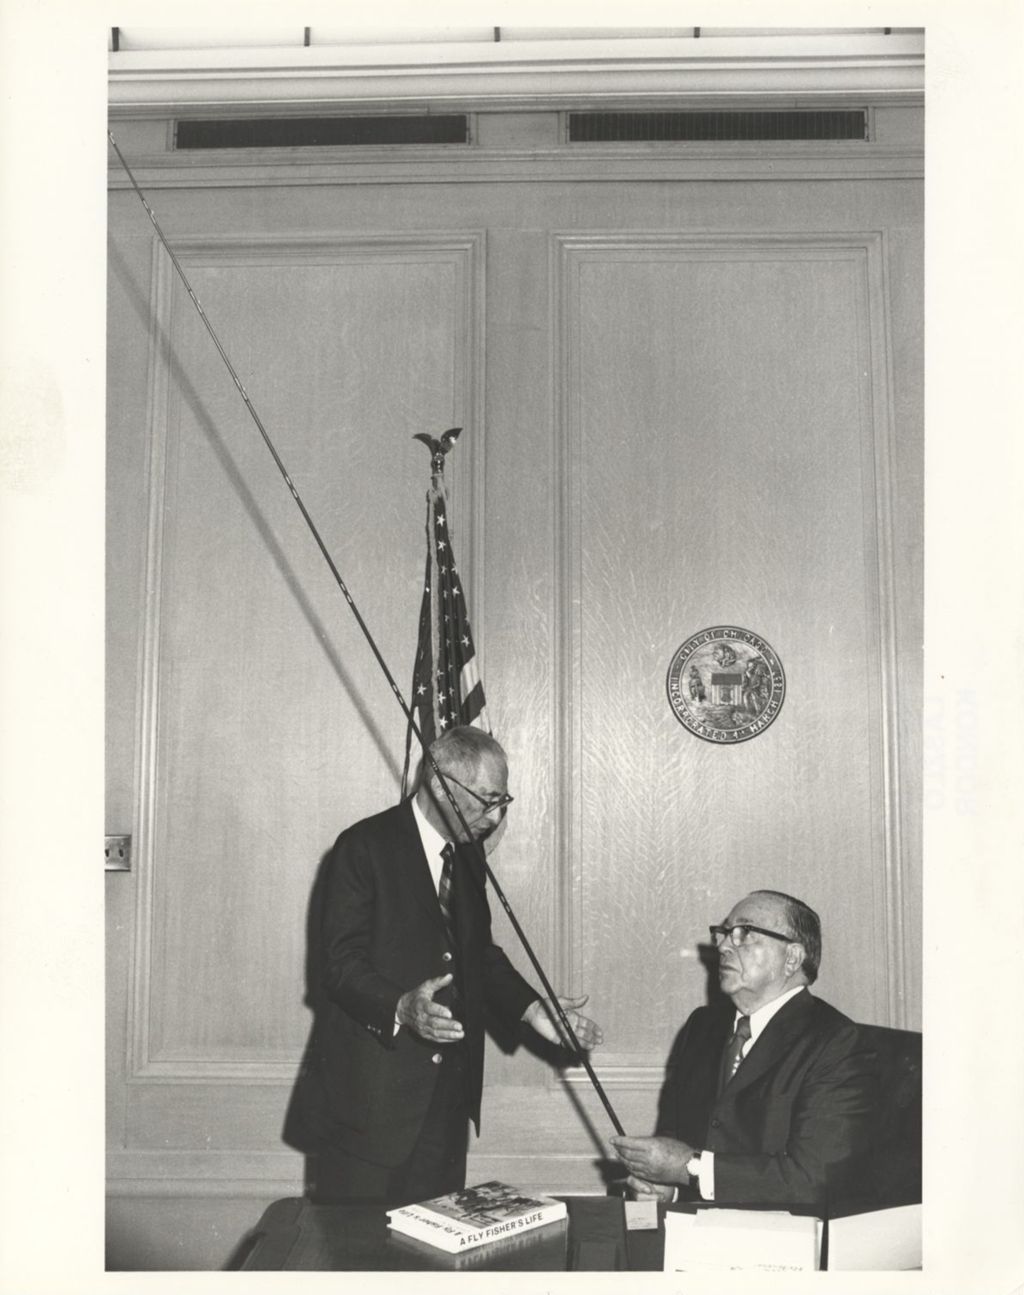 Miniature of Charles Ritz presenting gifts to Richard J. Daley